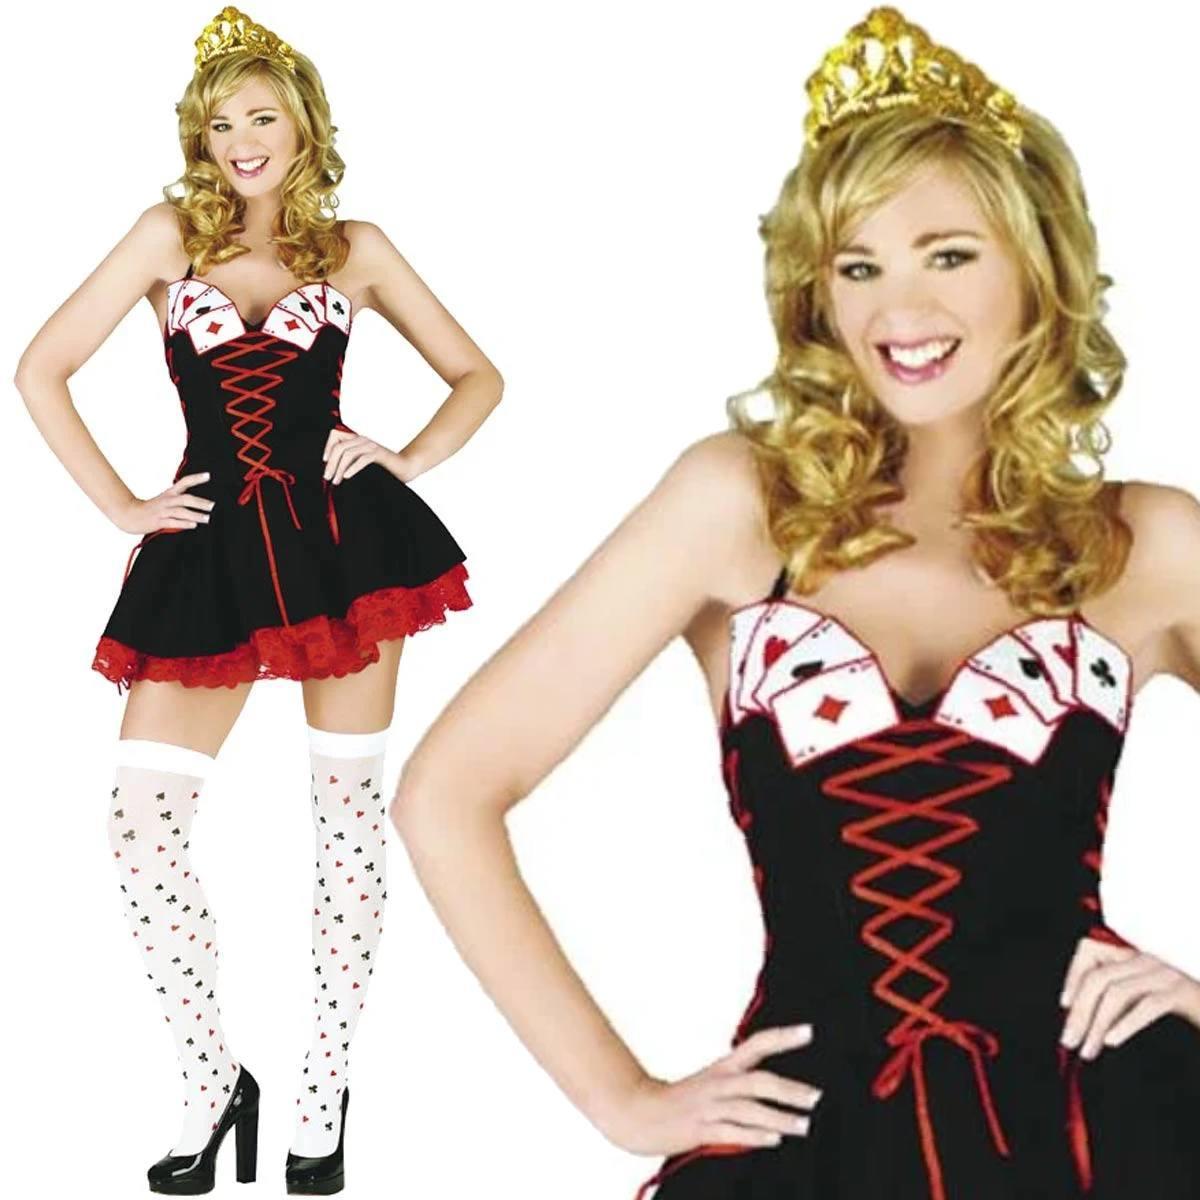 Lady's Queen of Cards Casino Costume by Classified GW2361 available here at Karnival Costumes online party shop